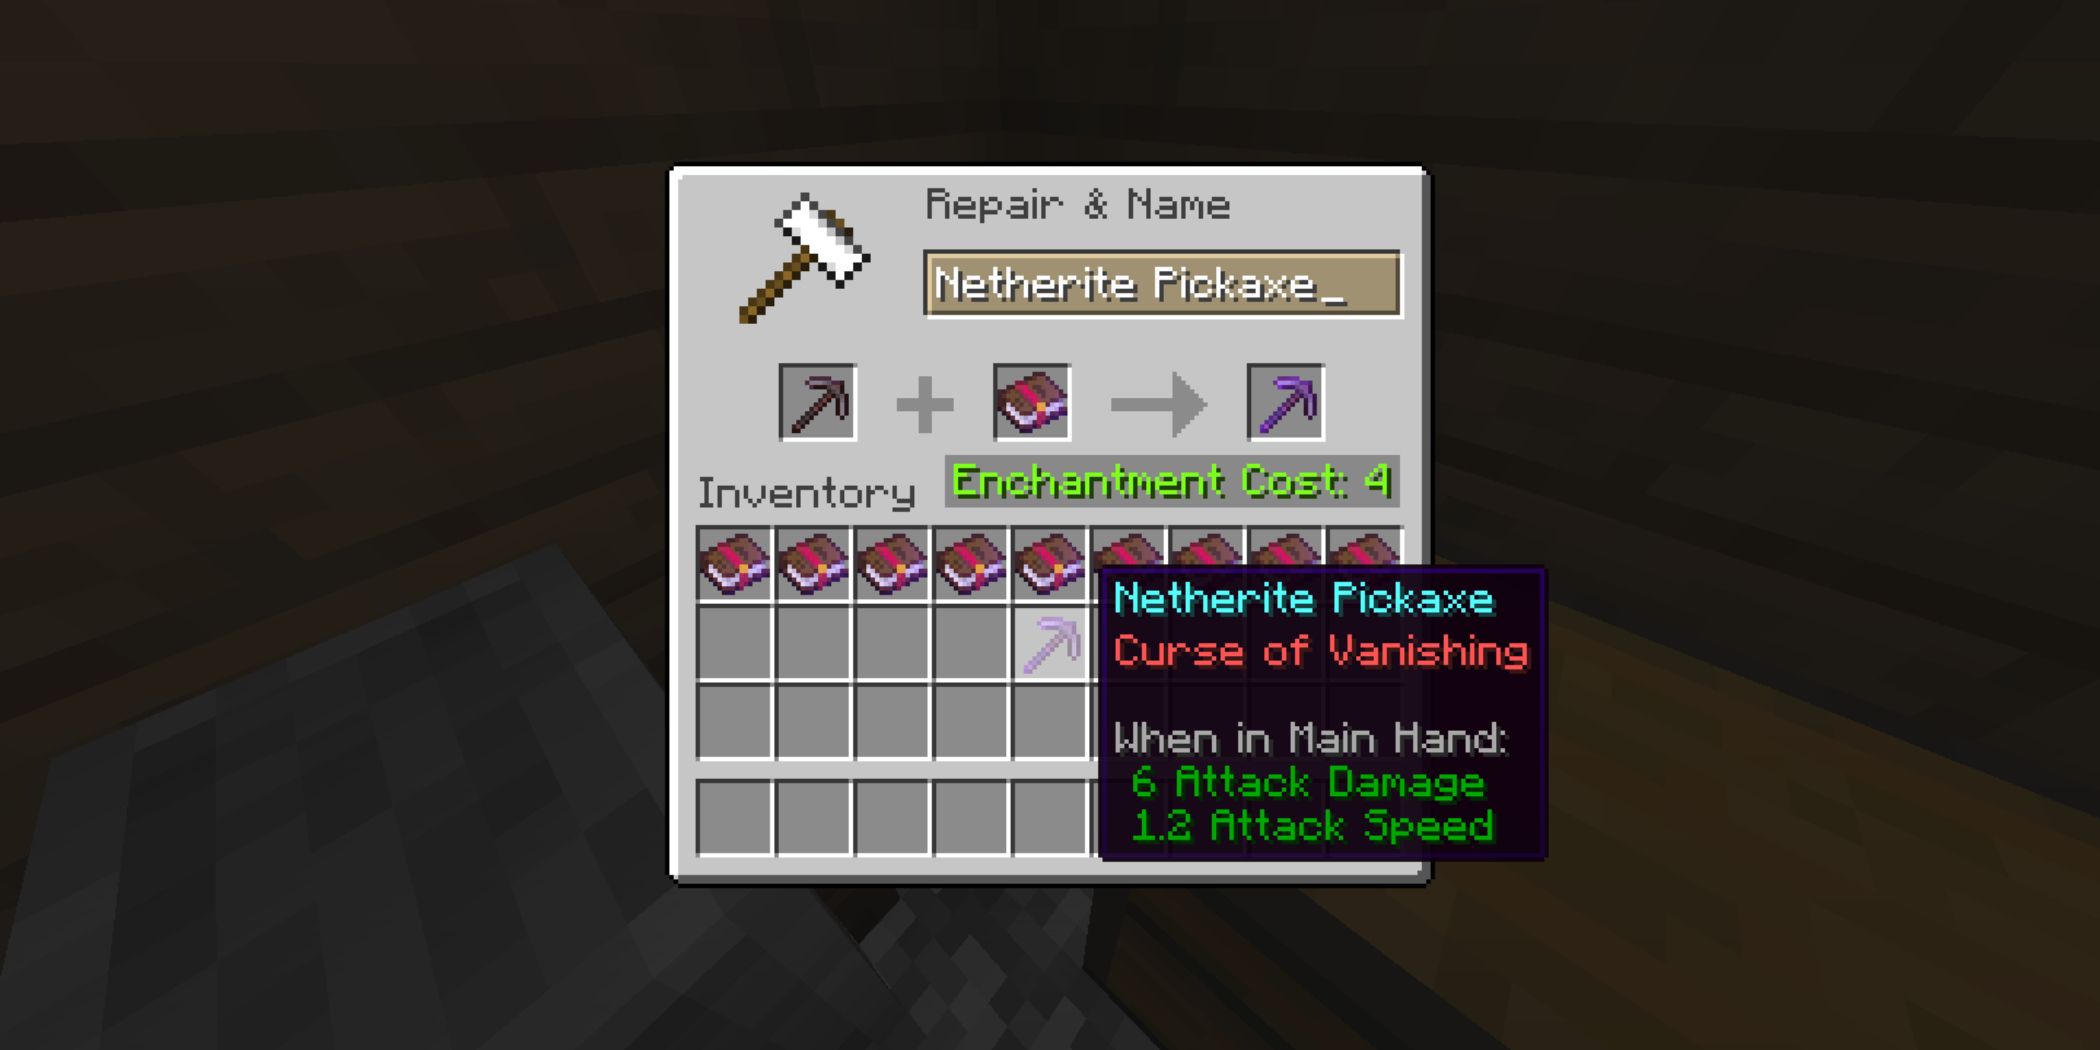 How to get the Unbreaking enchantment in Minecraft